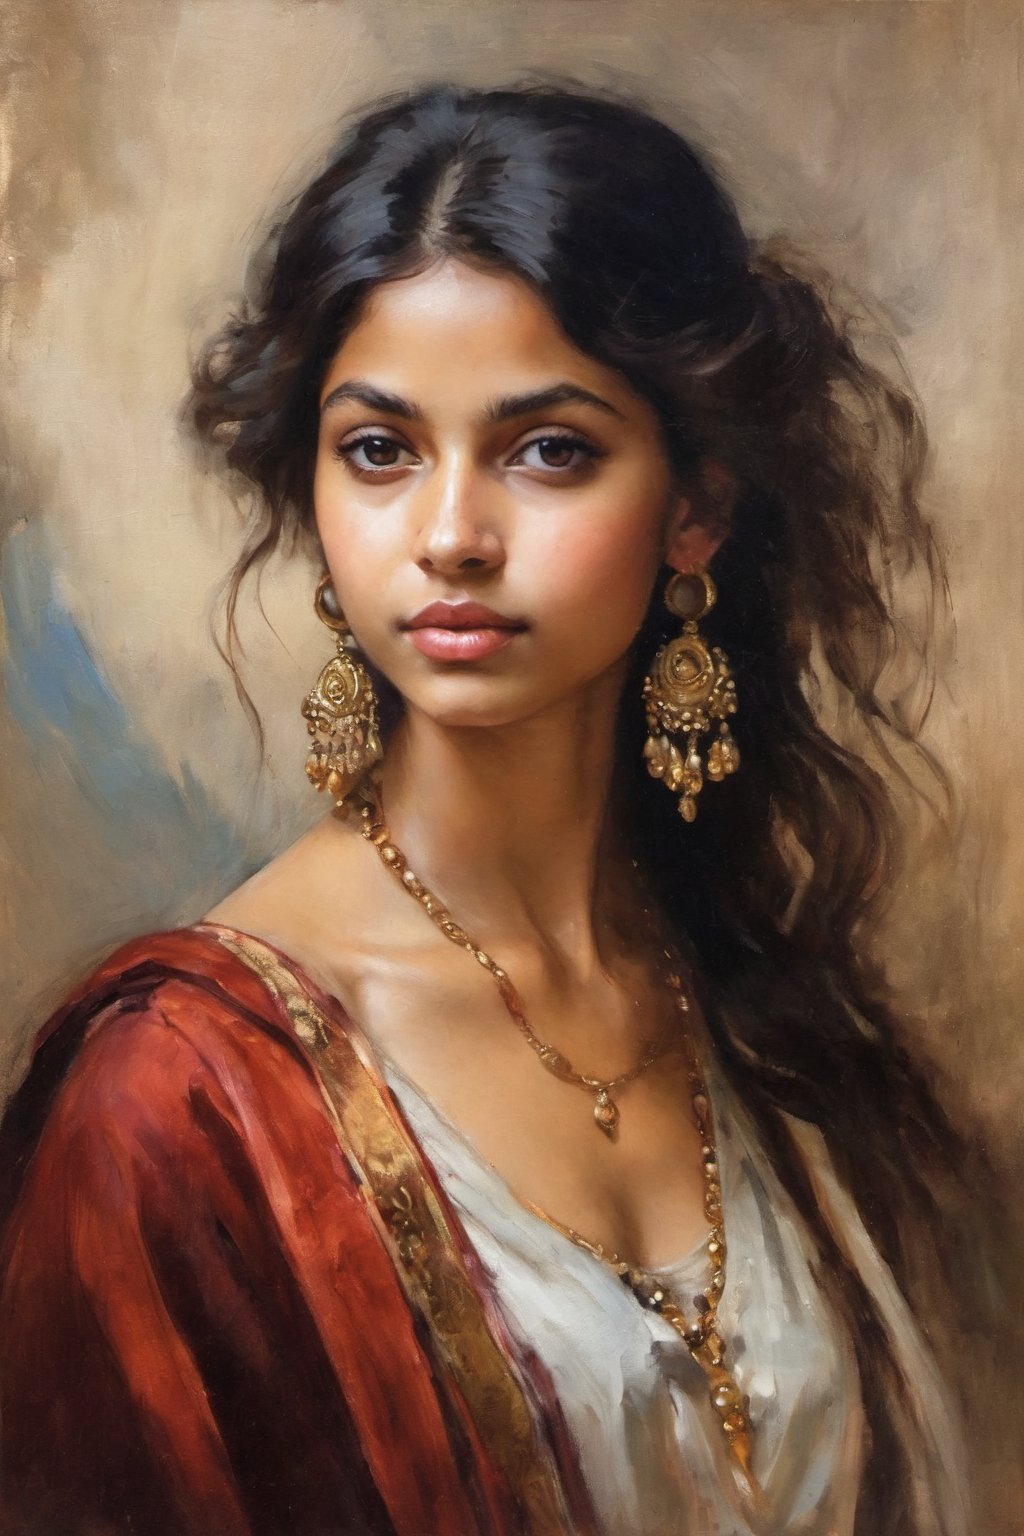 An oil painting in the style of John Singer Sargent and a print by Ivana Besevic, the lighting style of Rembrandt. A beautiful portrait of a 20-year-old Indian girl. A detailed, beautiful, girlish face. Narrow nose, beautiful, large eyes and full lips